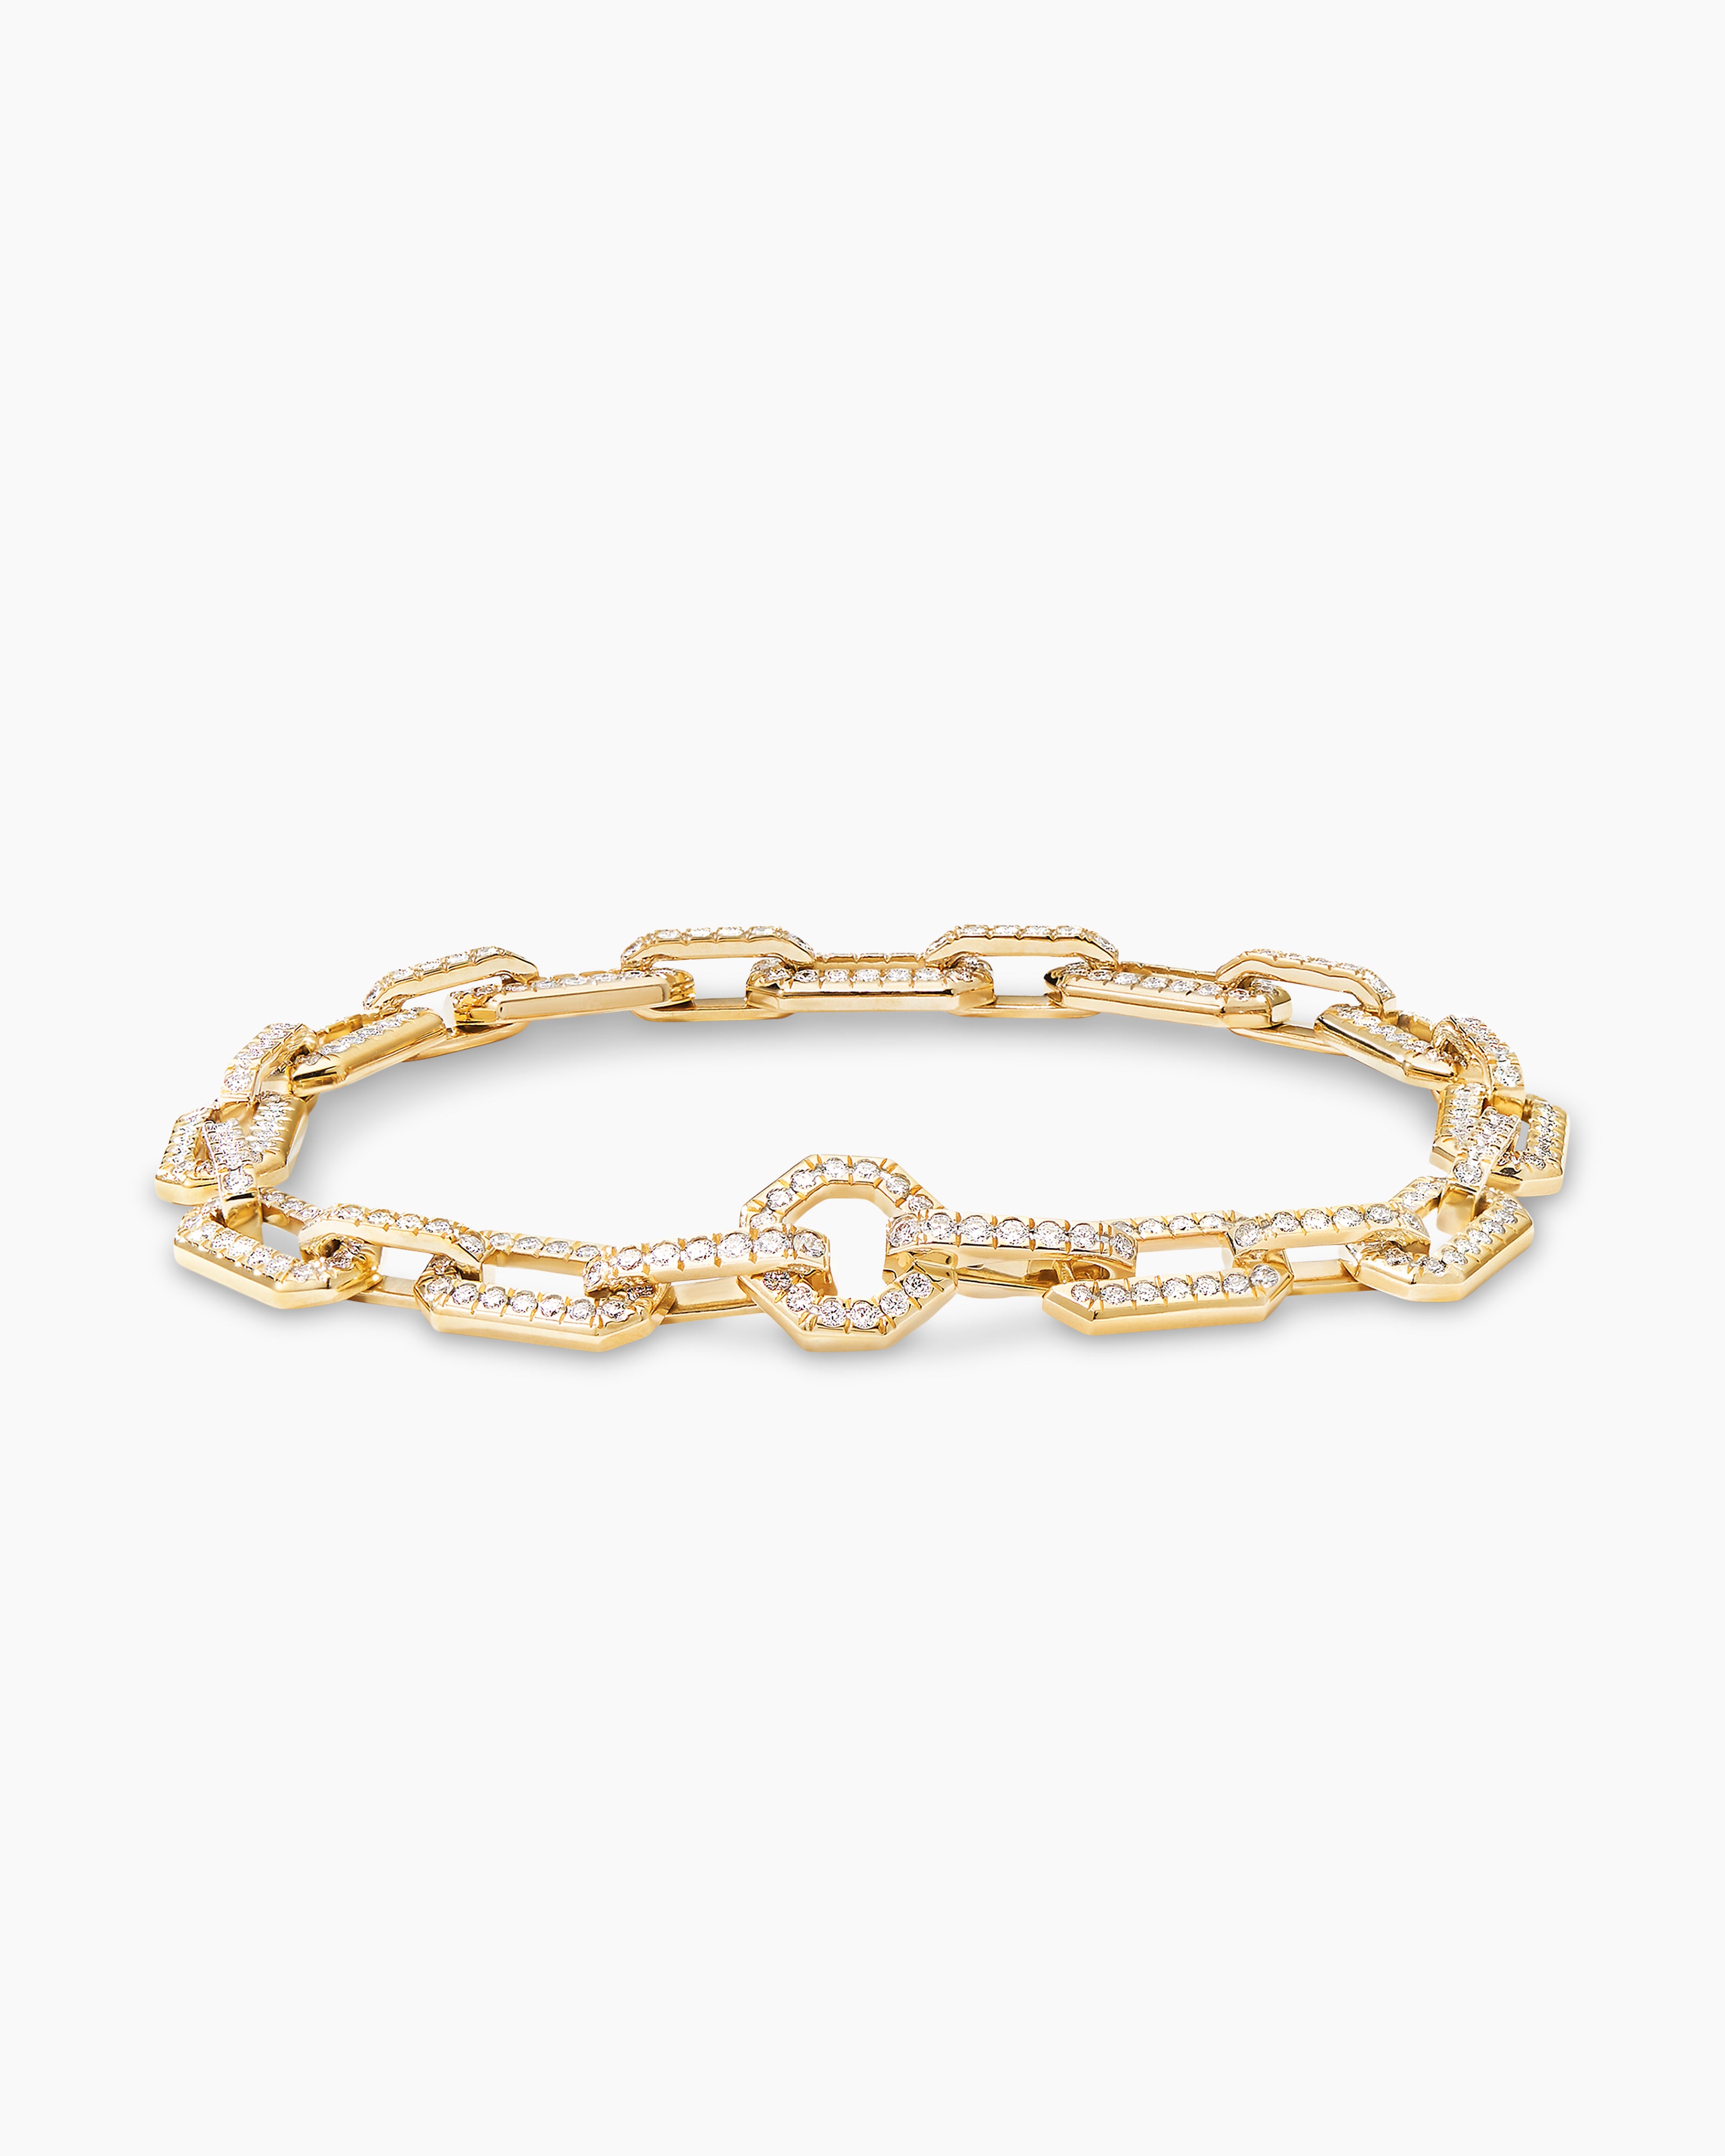 Pavé Chain Bracelet in 18K Yellow Gold with Diamonds, 7mm